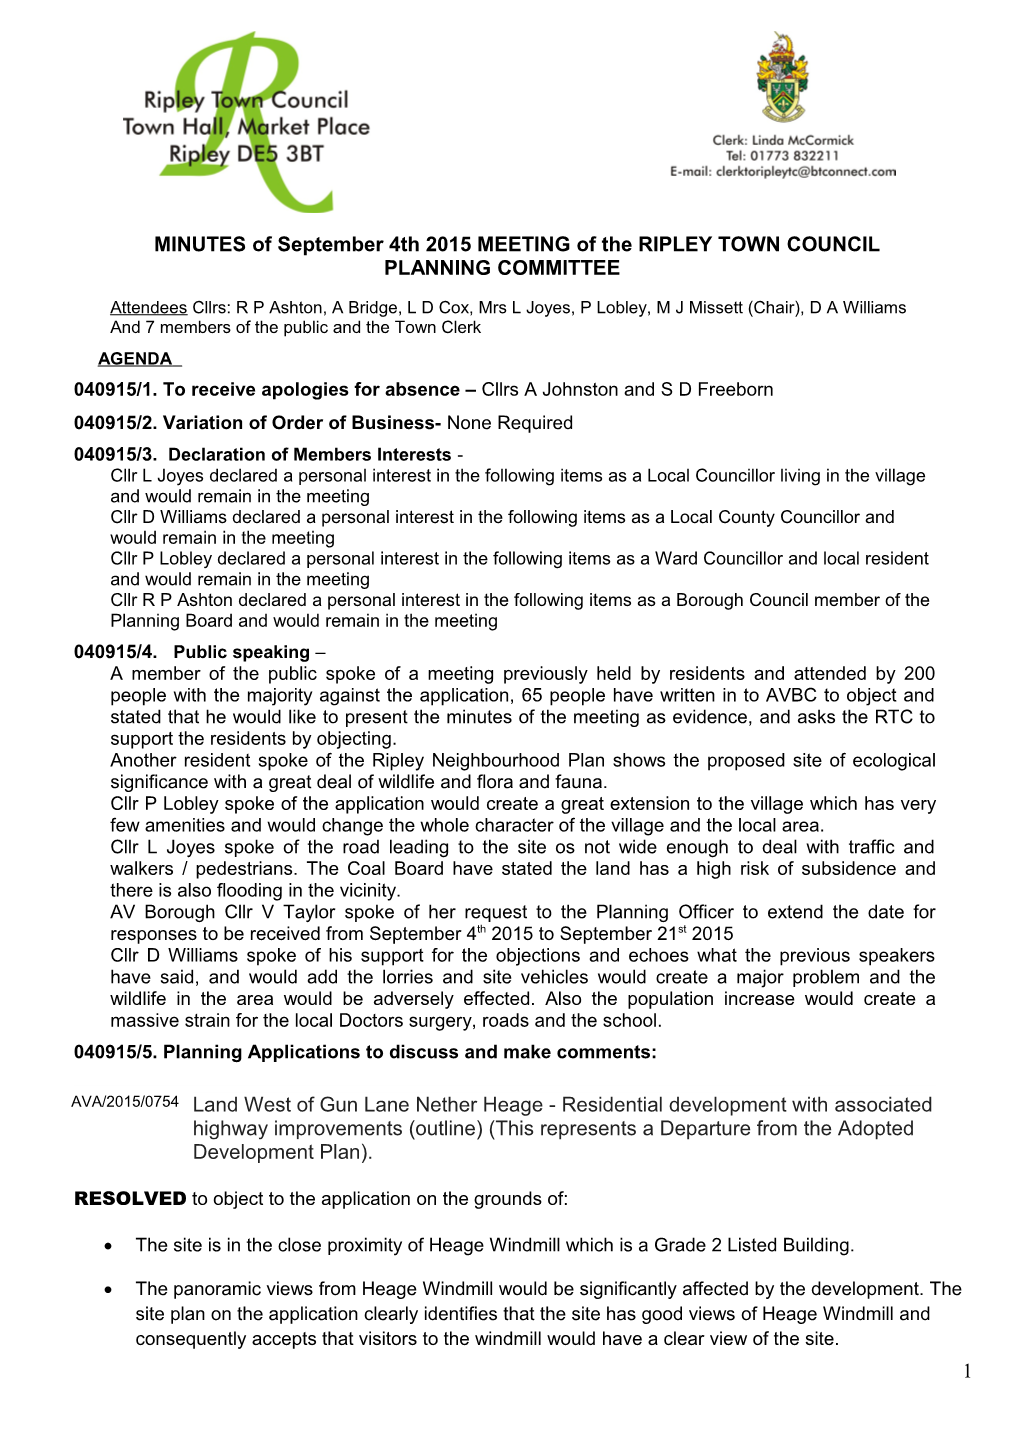 MINUTES of September4th 2015MEETING of Theripley TOWN COUNCIL PLANNINGCOMMITTEE